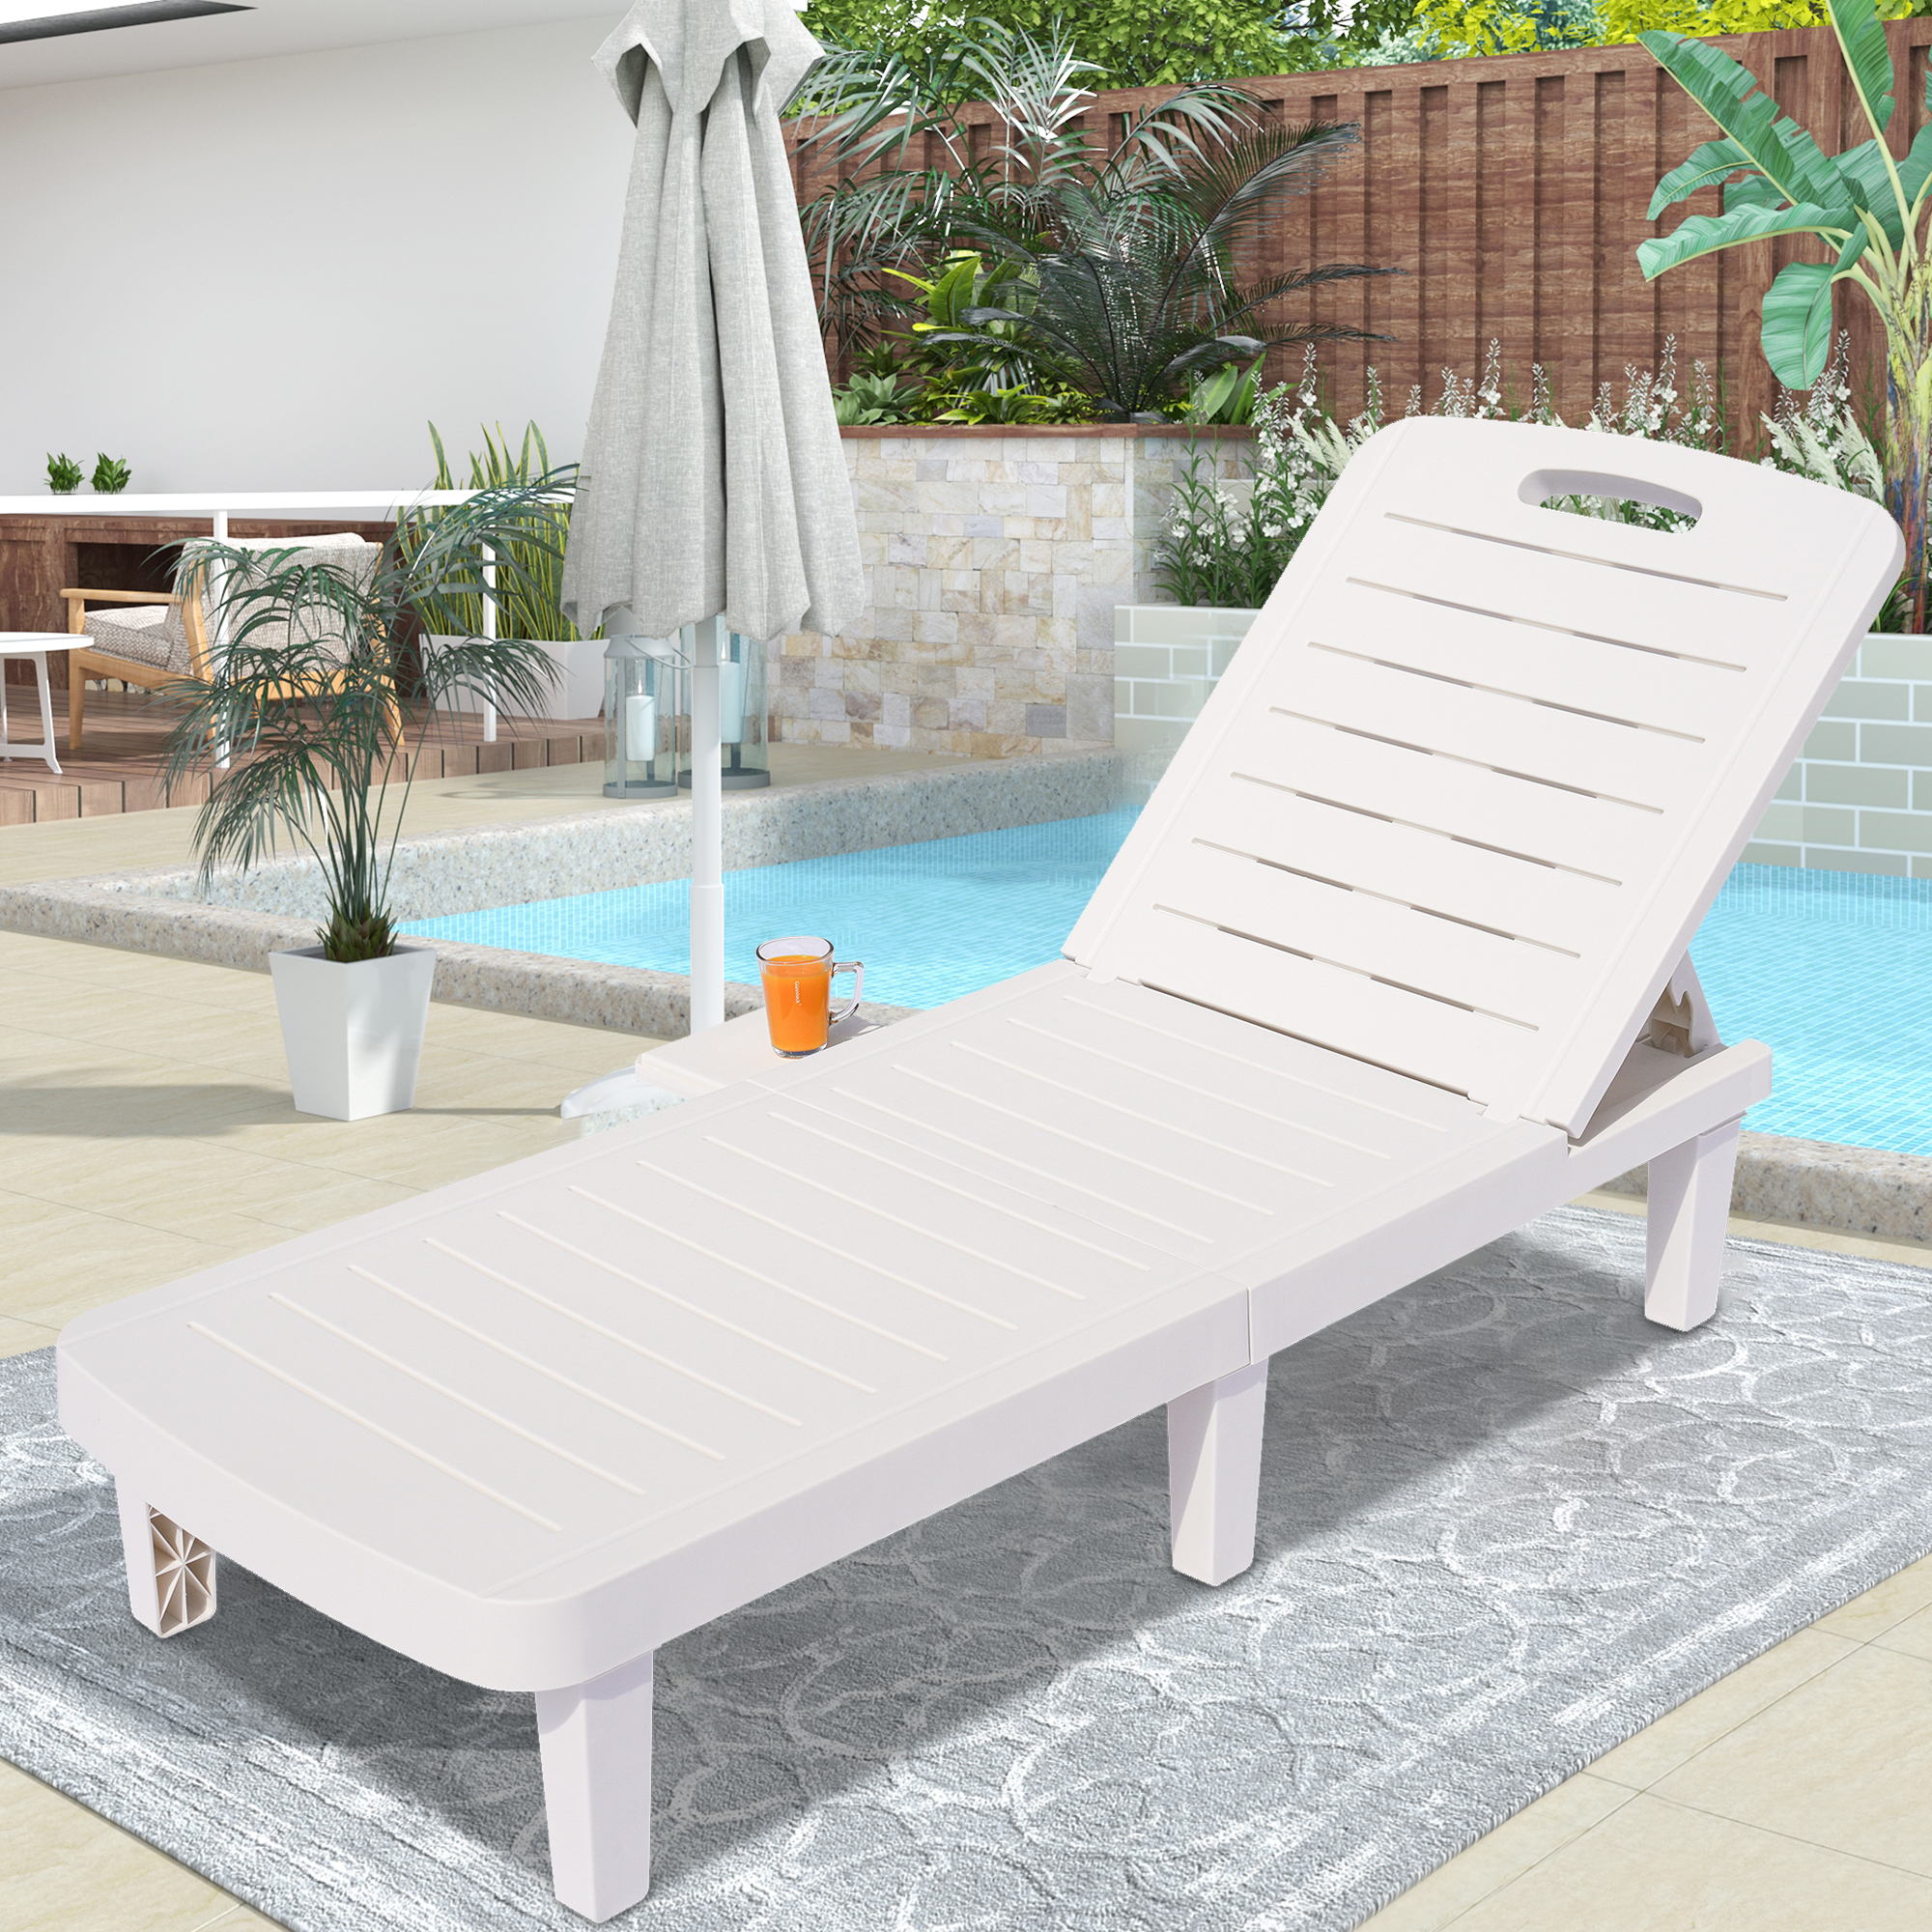 Patio Lounge Chair Set of 2, Adjustable Chaise with Side Table, Outdoor Lounger Recliner for Poolside, Patio, Backyard, Wood Texture Design | Waterproof | Easy to Assemble | Max Weight 330 lbs White - image 3 of 10